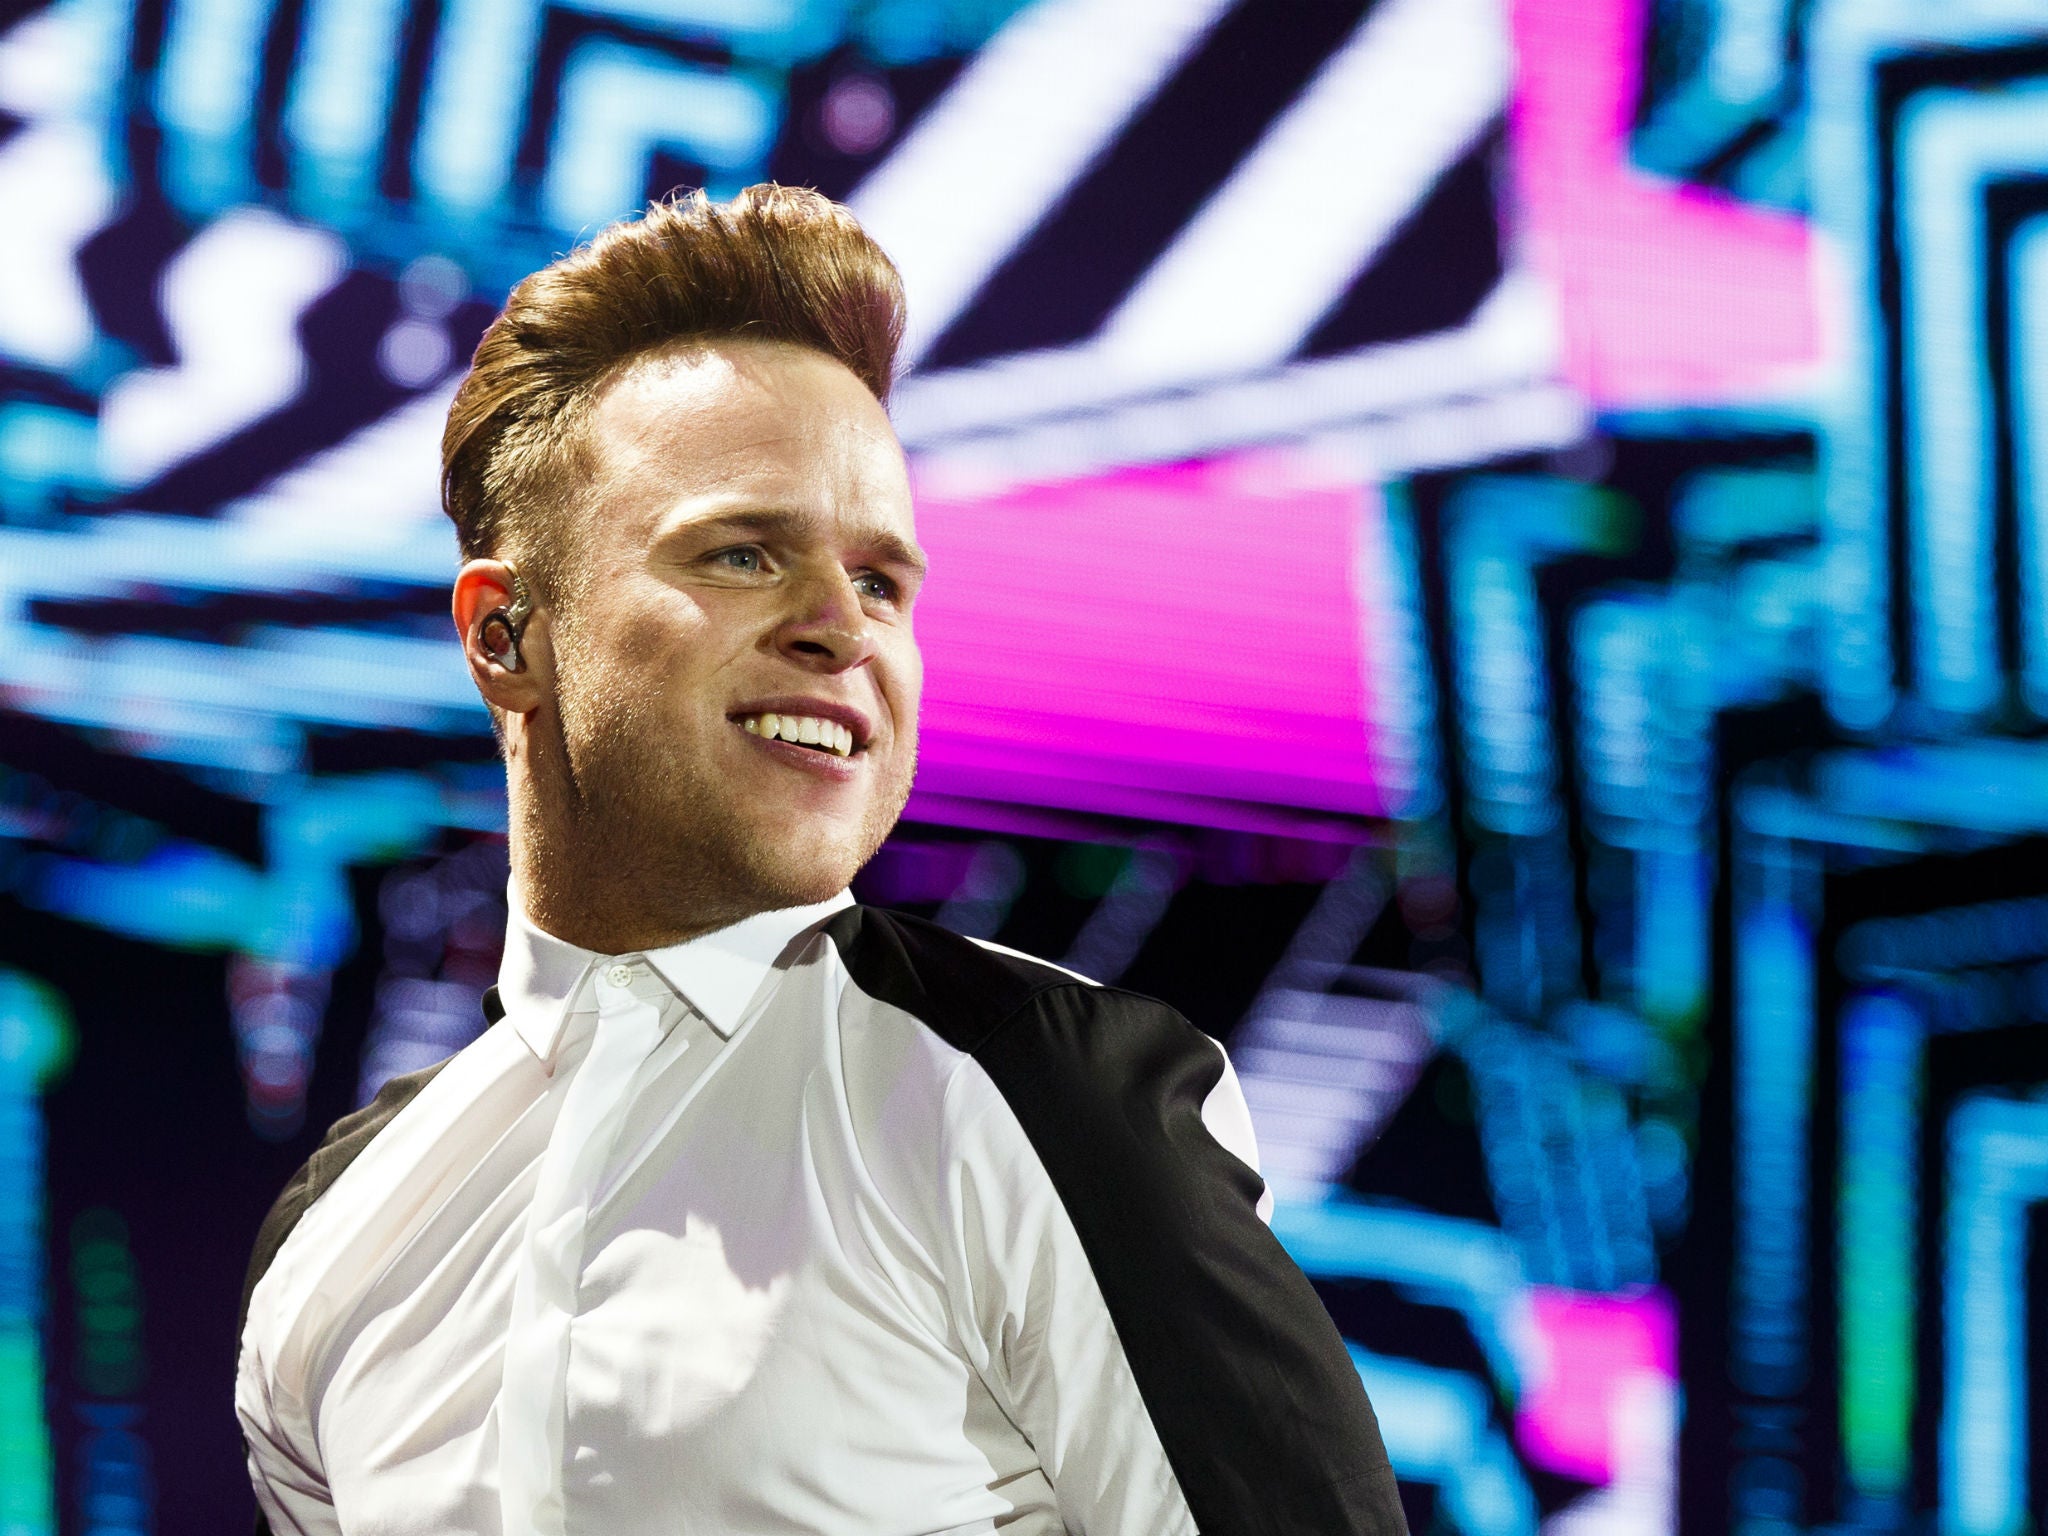 Olly Murs only hosted one series of The X Factor after Dermot O'Leary quit